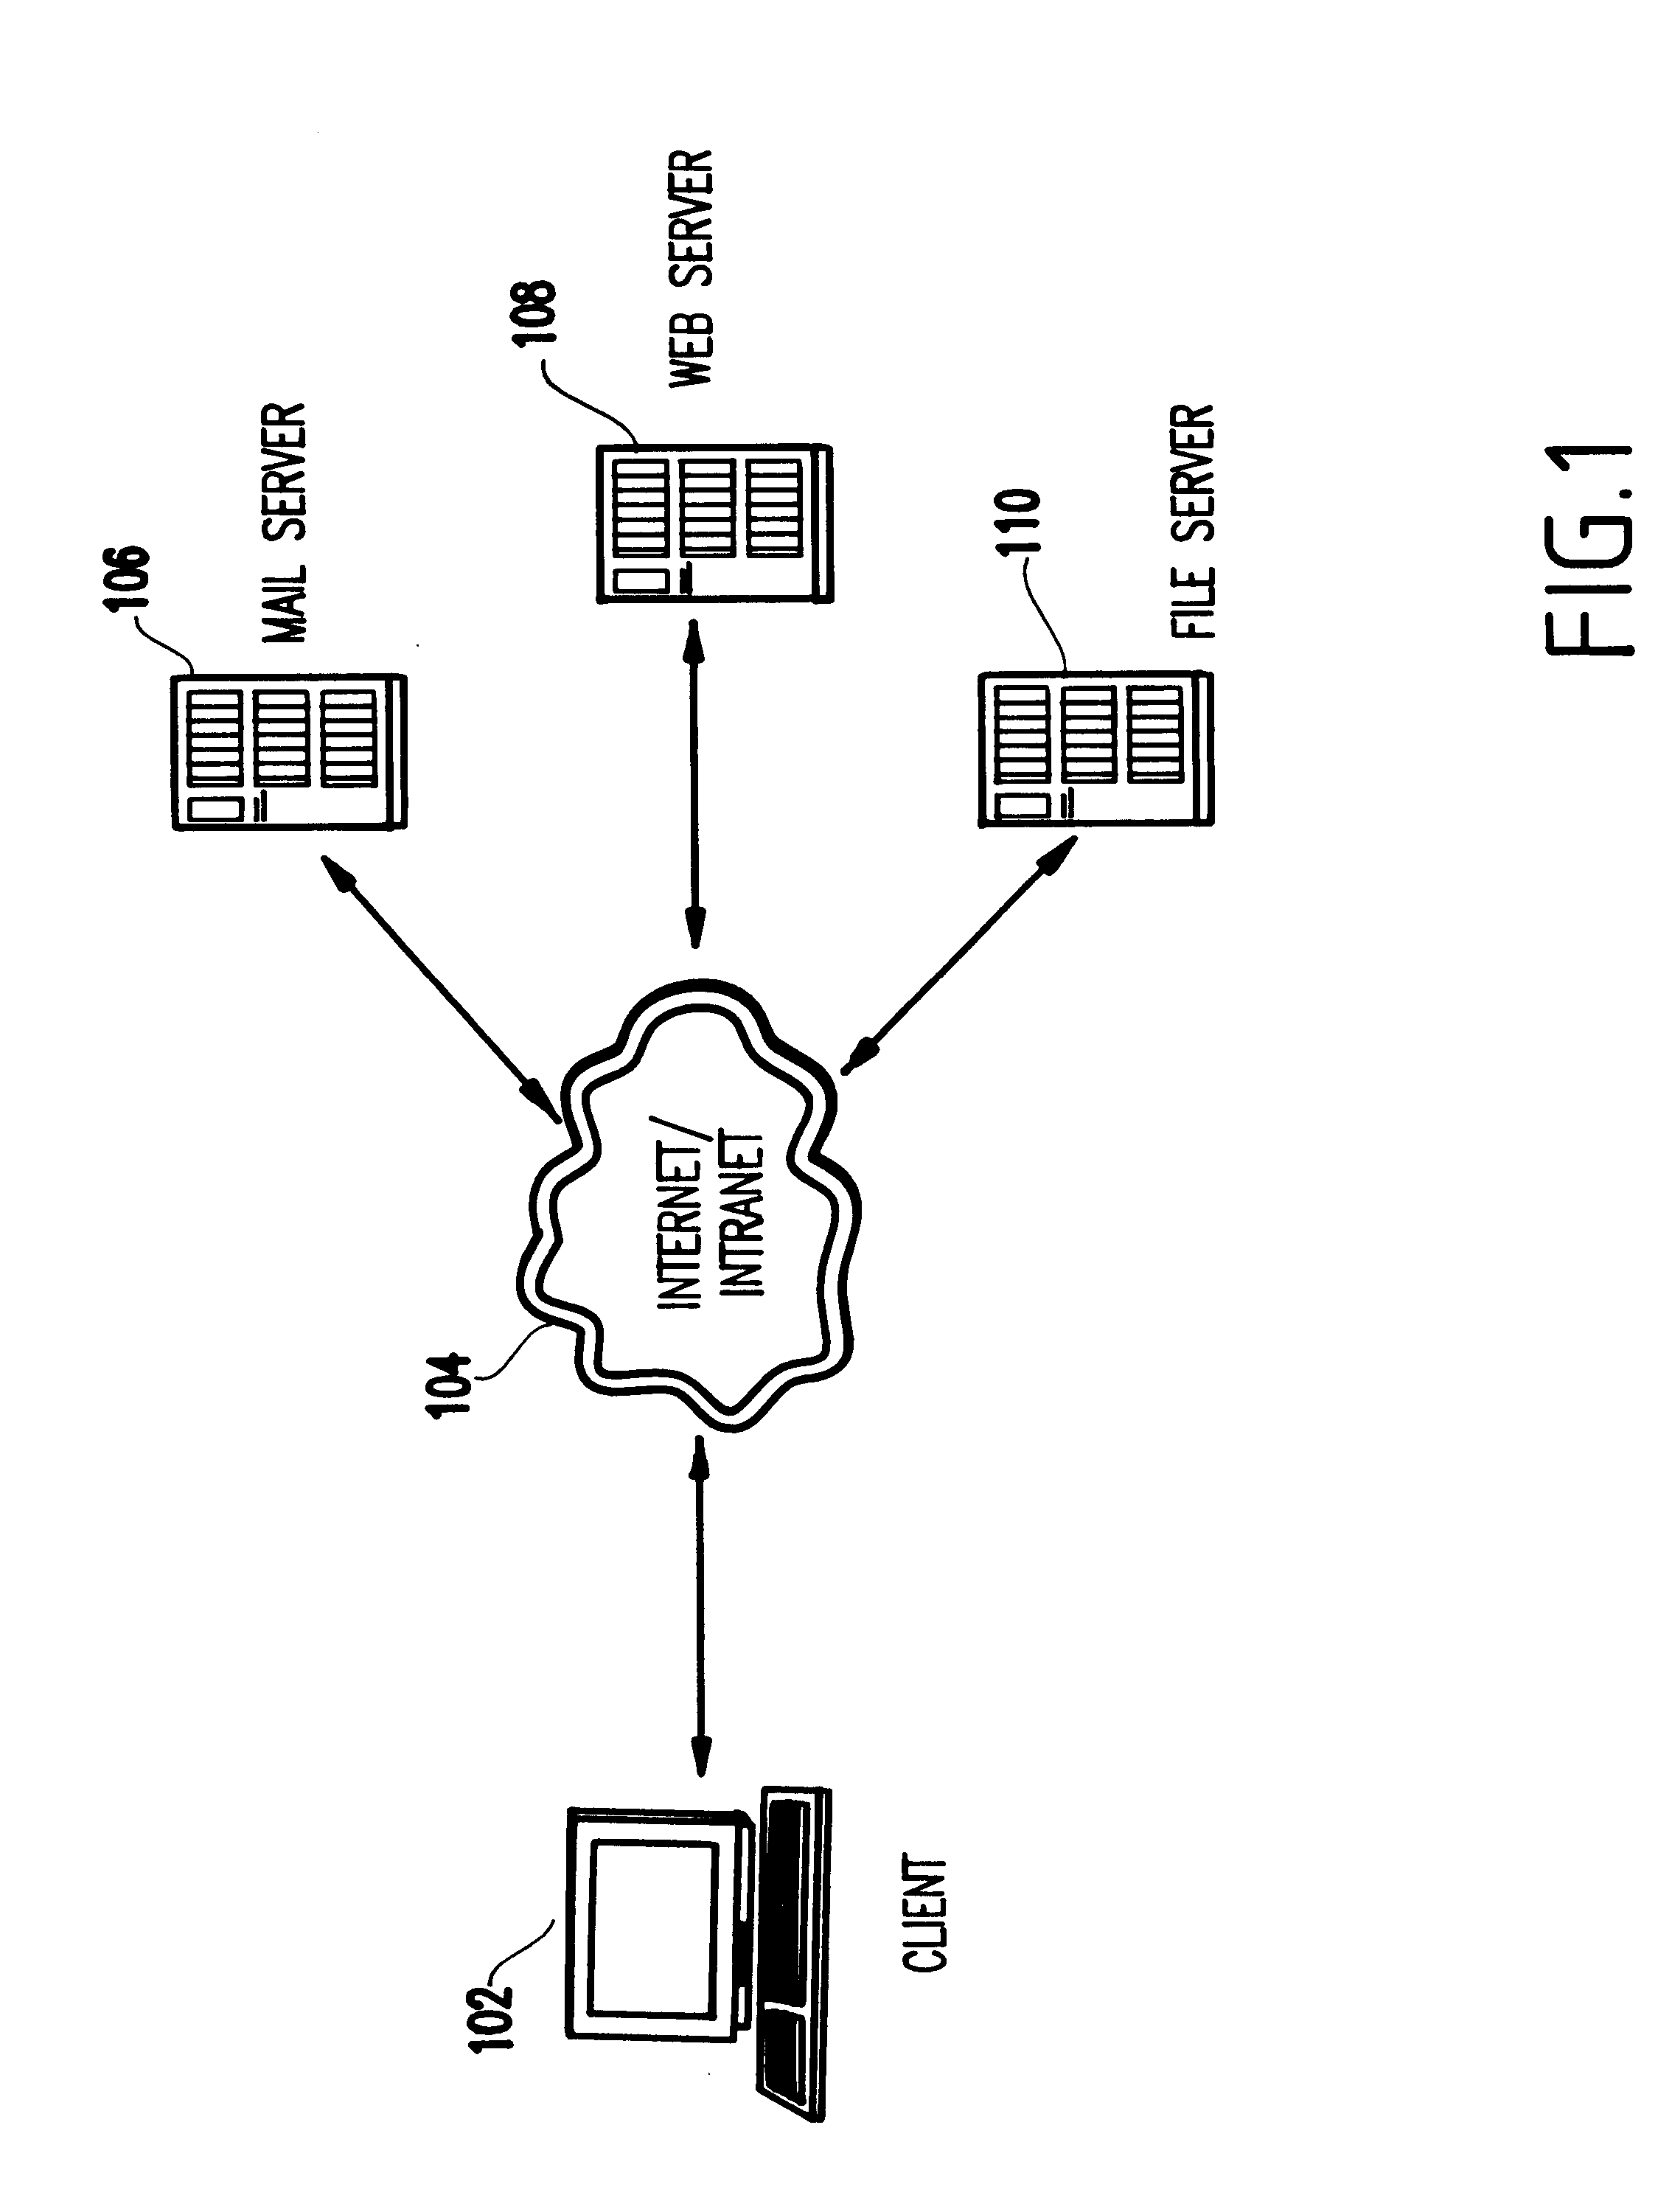 Method and apparatus for a centralized facility for administering and performing connectivity and information management tasks for a mobile user